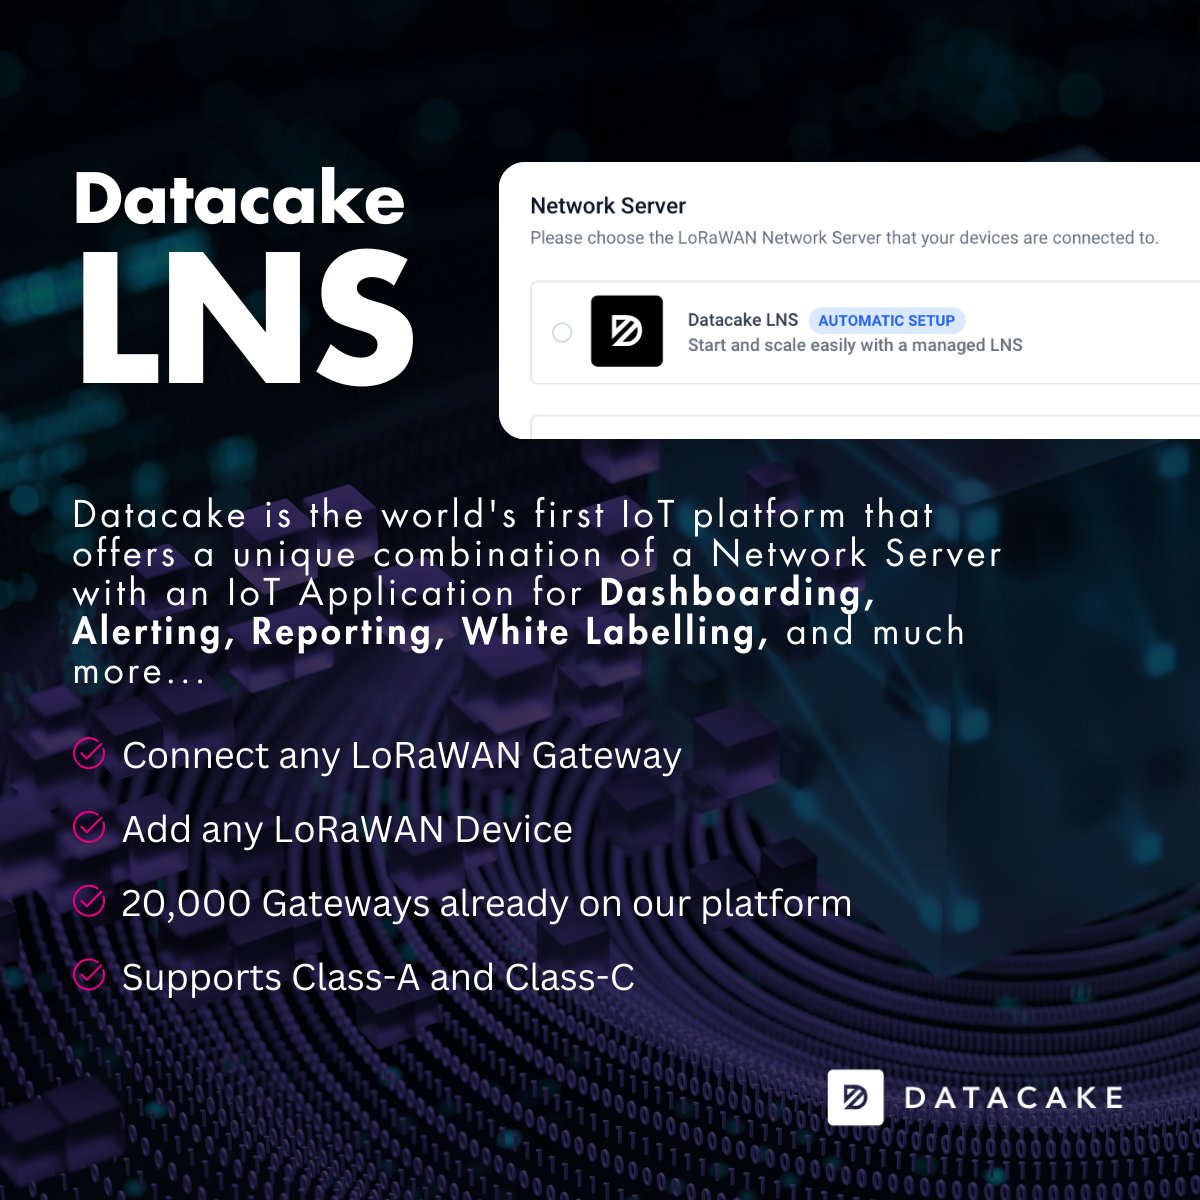 Simplify your LoRaWAN network with Datacake's LNS: connect devices, access real-time data, and manage easily. Leverage 20,000+ gateways. #IoT #LoRaWAN